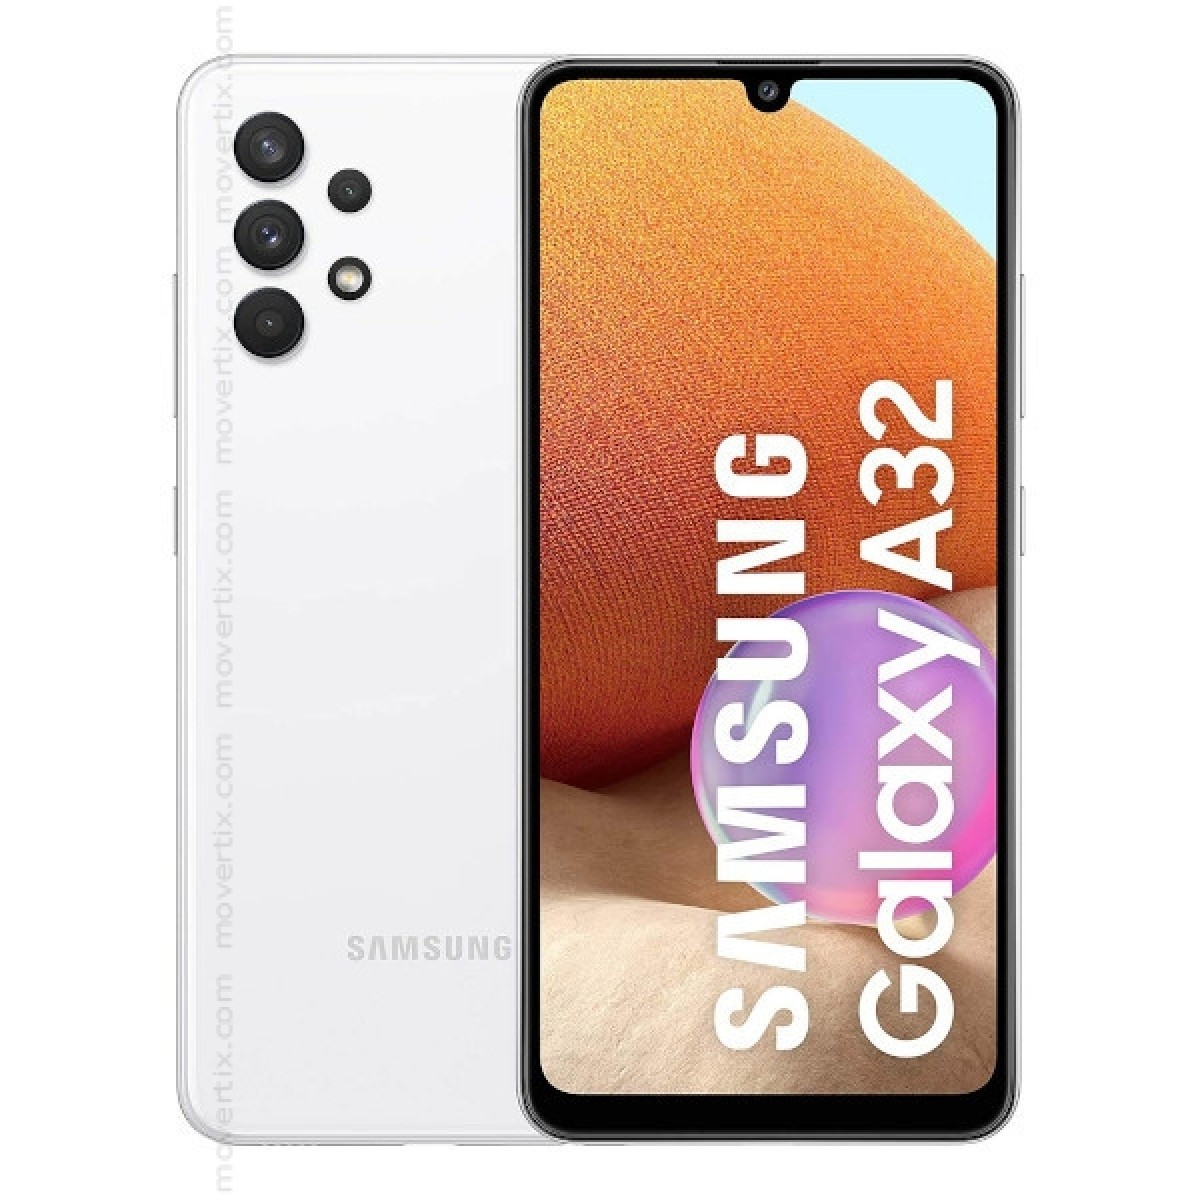 MOBILE PHONE SAMSUNG 6.4 OCTA CORE 1.8GHZ 6GB 128GB DUAL SIM GALAXY A32 WHITE OB ,Android Smartphone